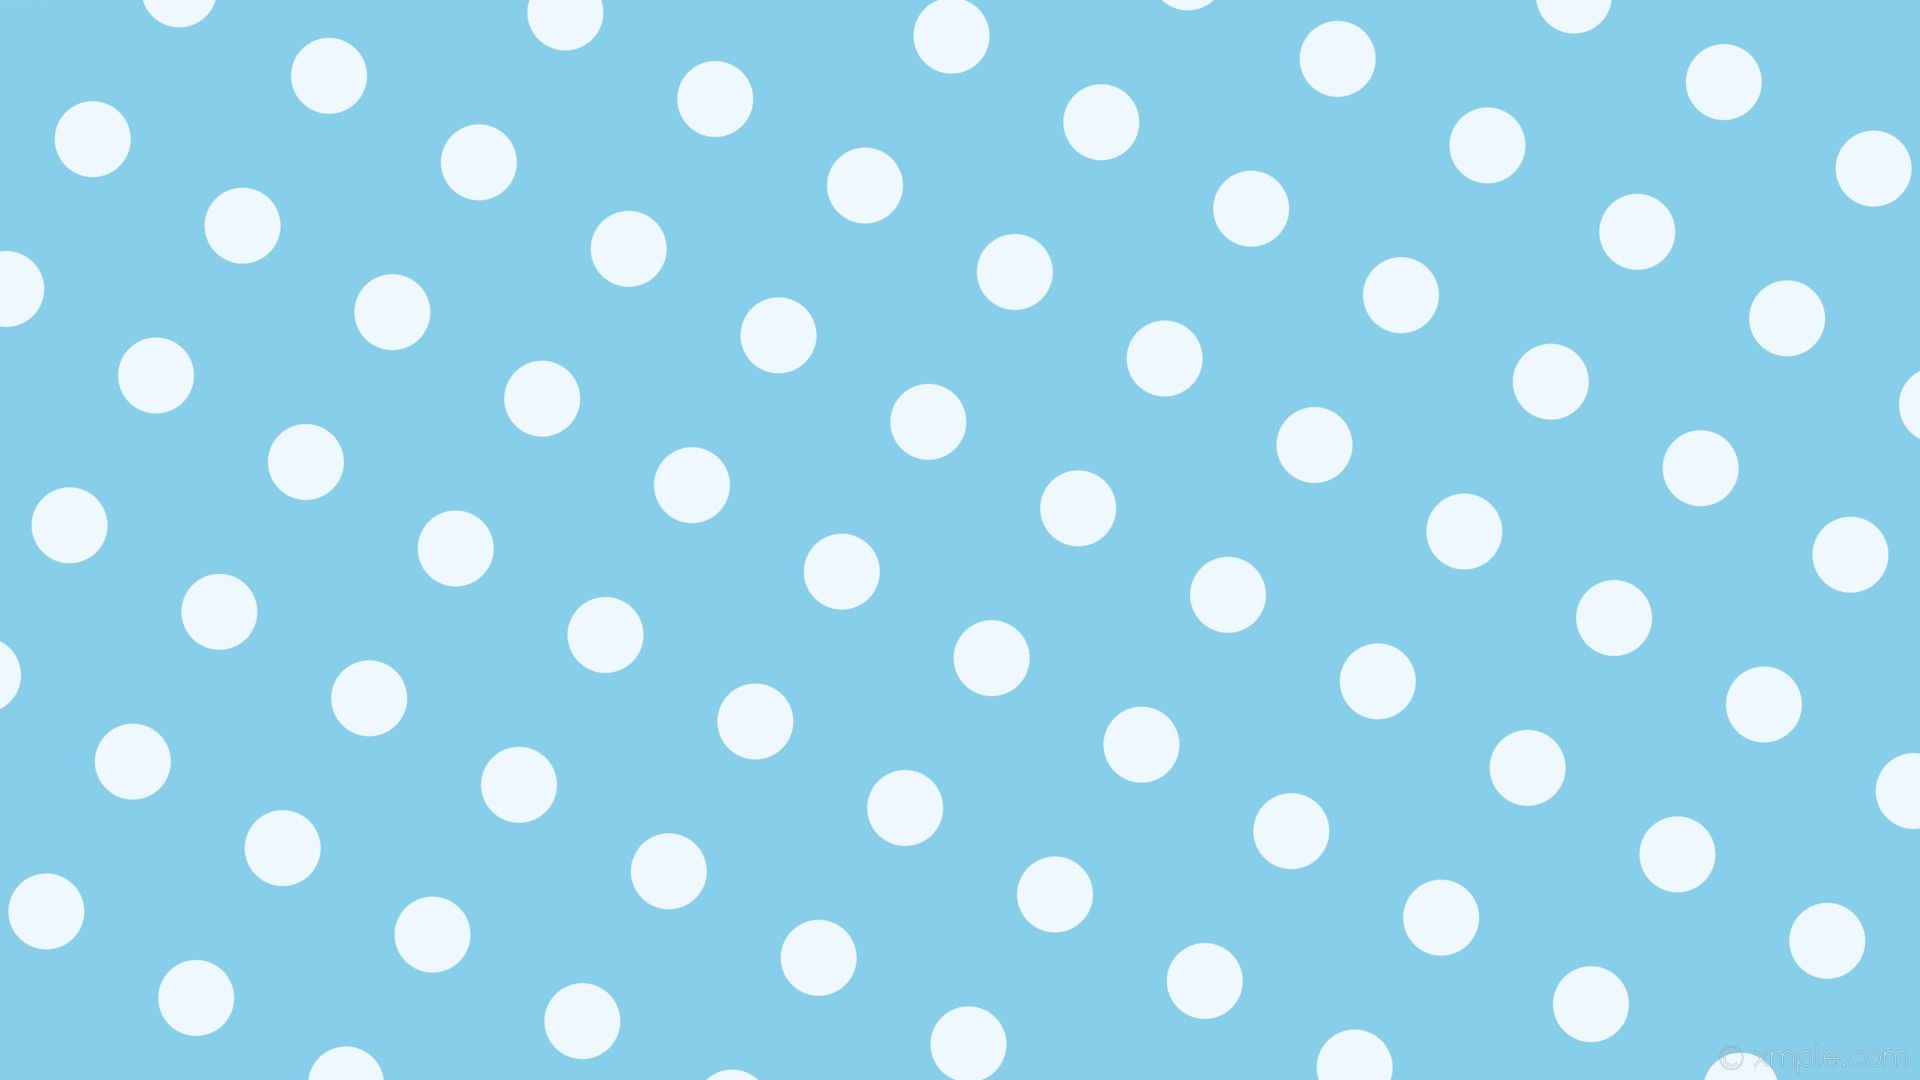 Polka Dot, Chic and trendy, Versatile patterns, Easy to coordinate, 1920x1080 Full HD Desktop